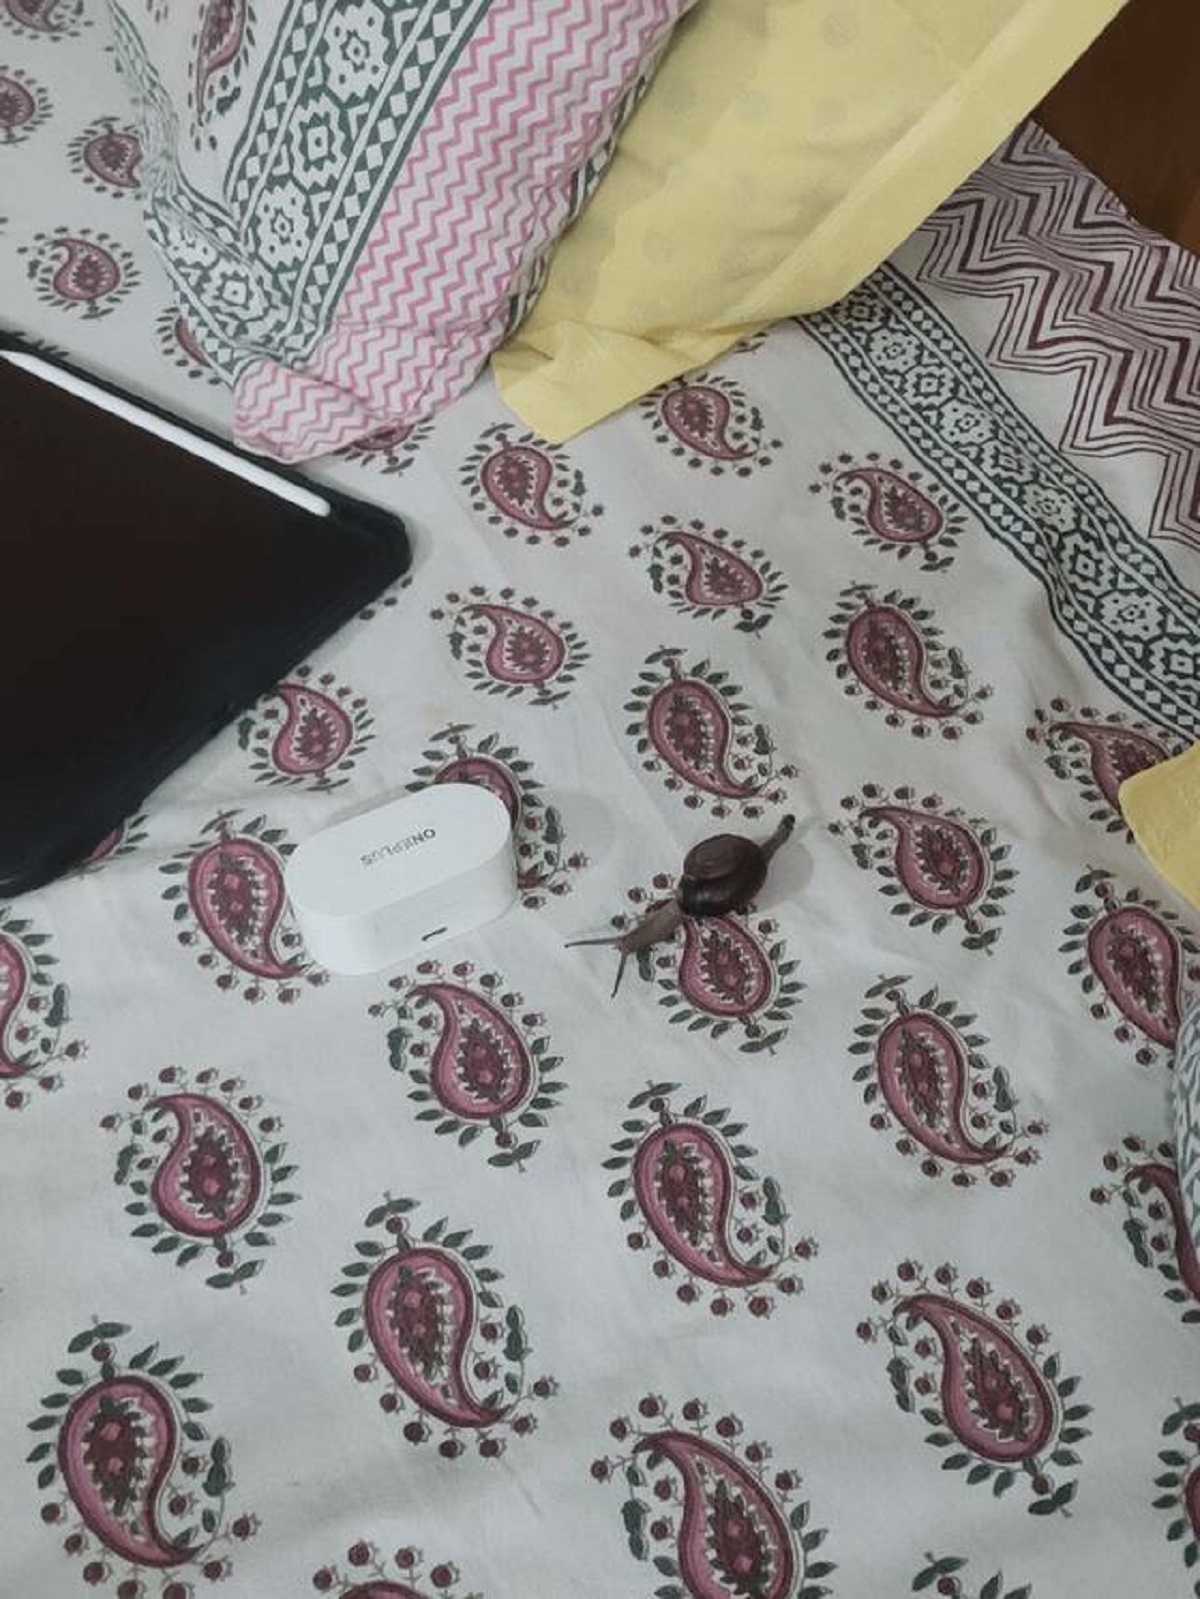 "Somehow this snail reached my bed"